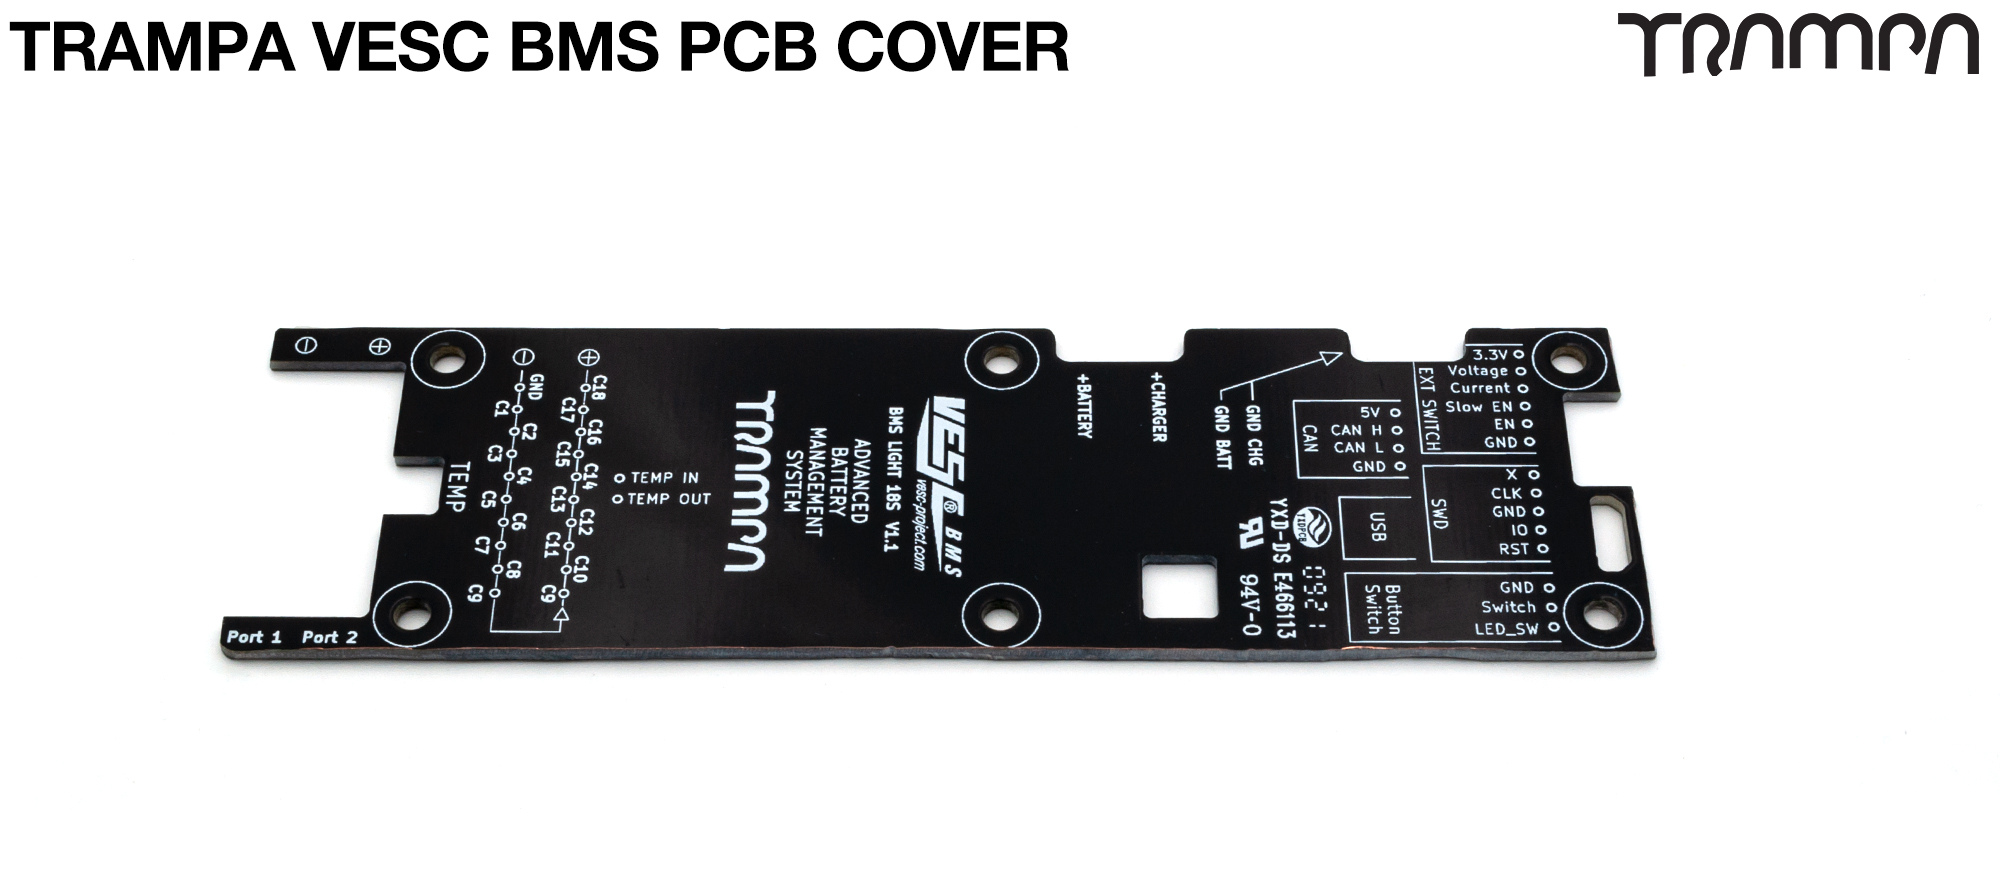 TRAMPA VESC Battery Management System PCB COVER - Top